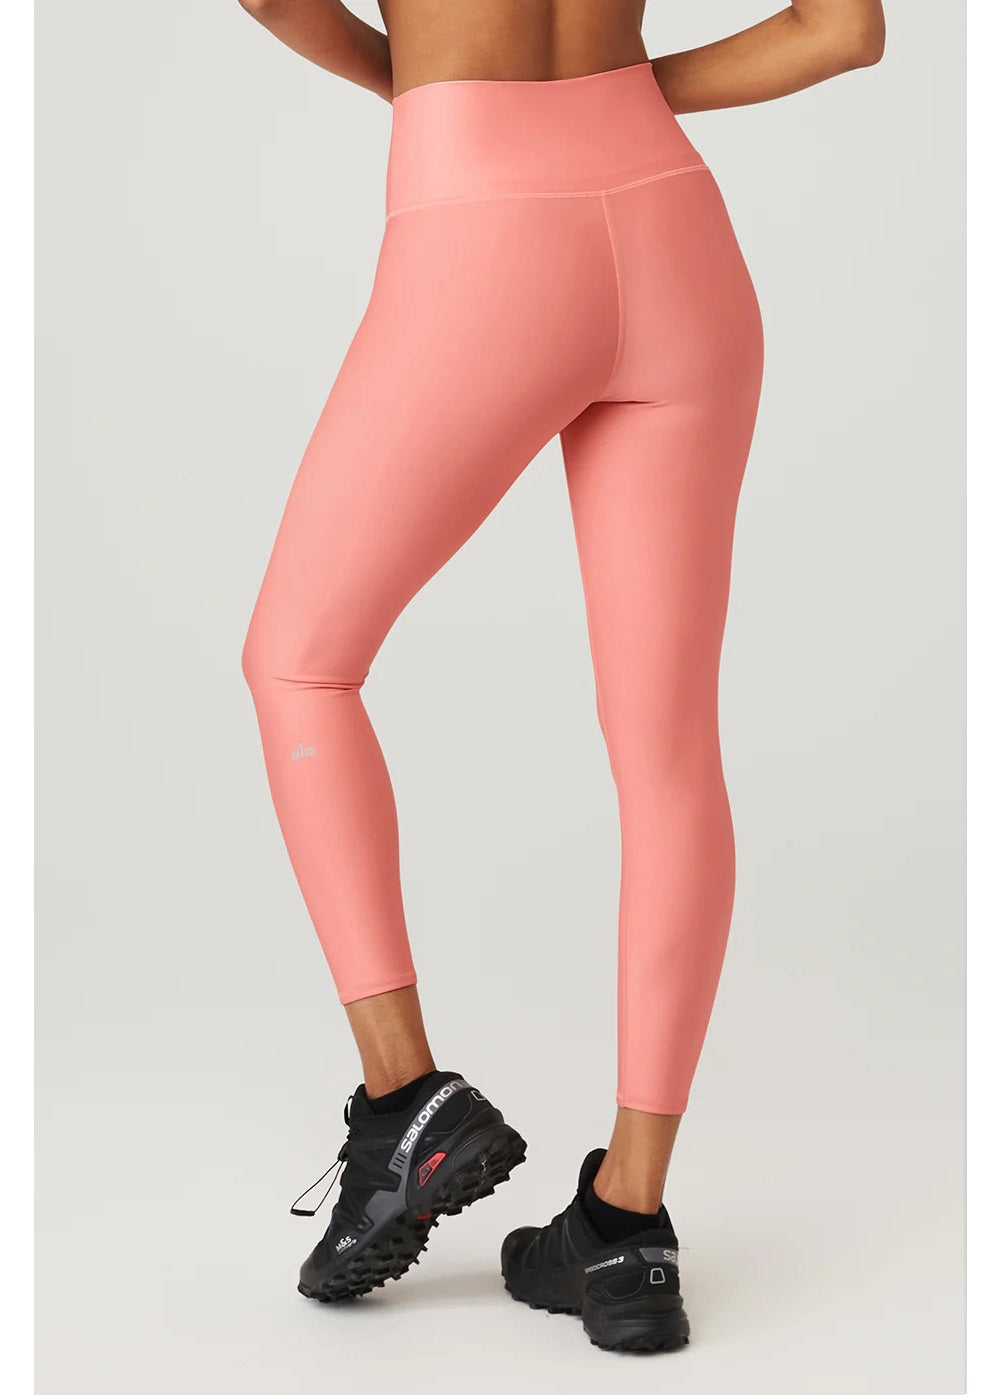 TUFF ATHLETICS WOMEN'S Pink High Waisted 7/8 Legging with Pockets